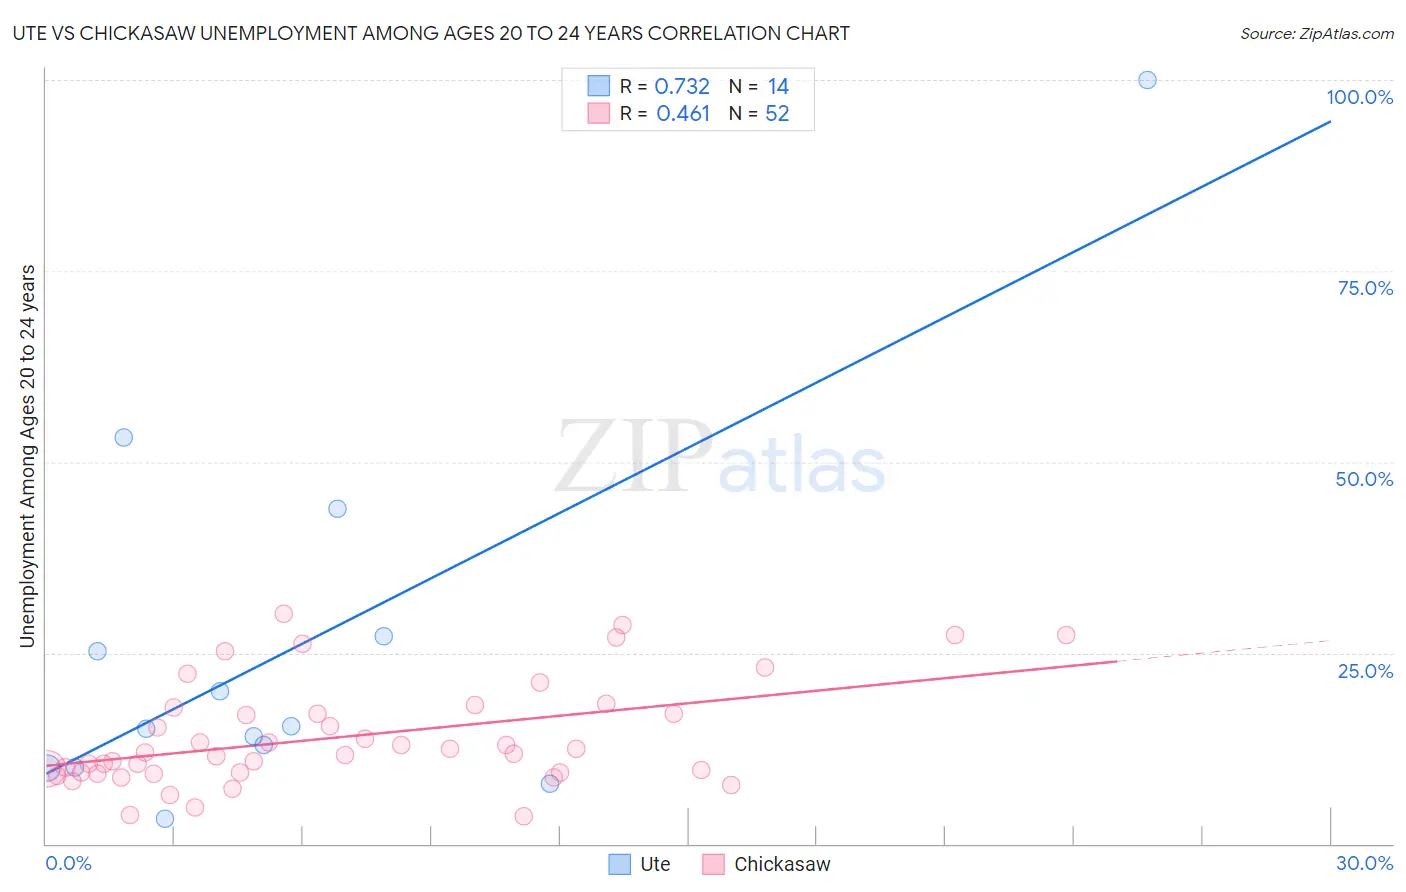 Ute vs Chickasaw Unemployment Among Ages 20 to 24 years